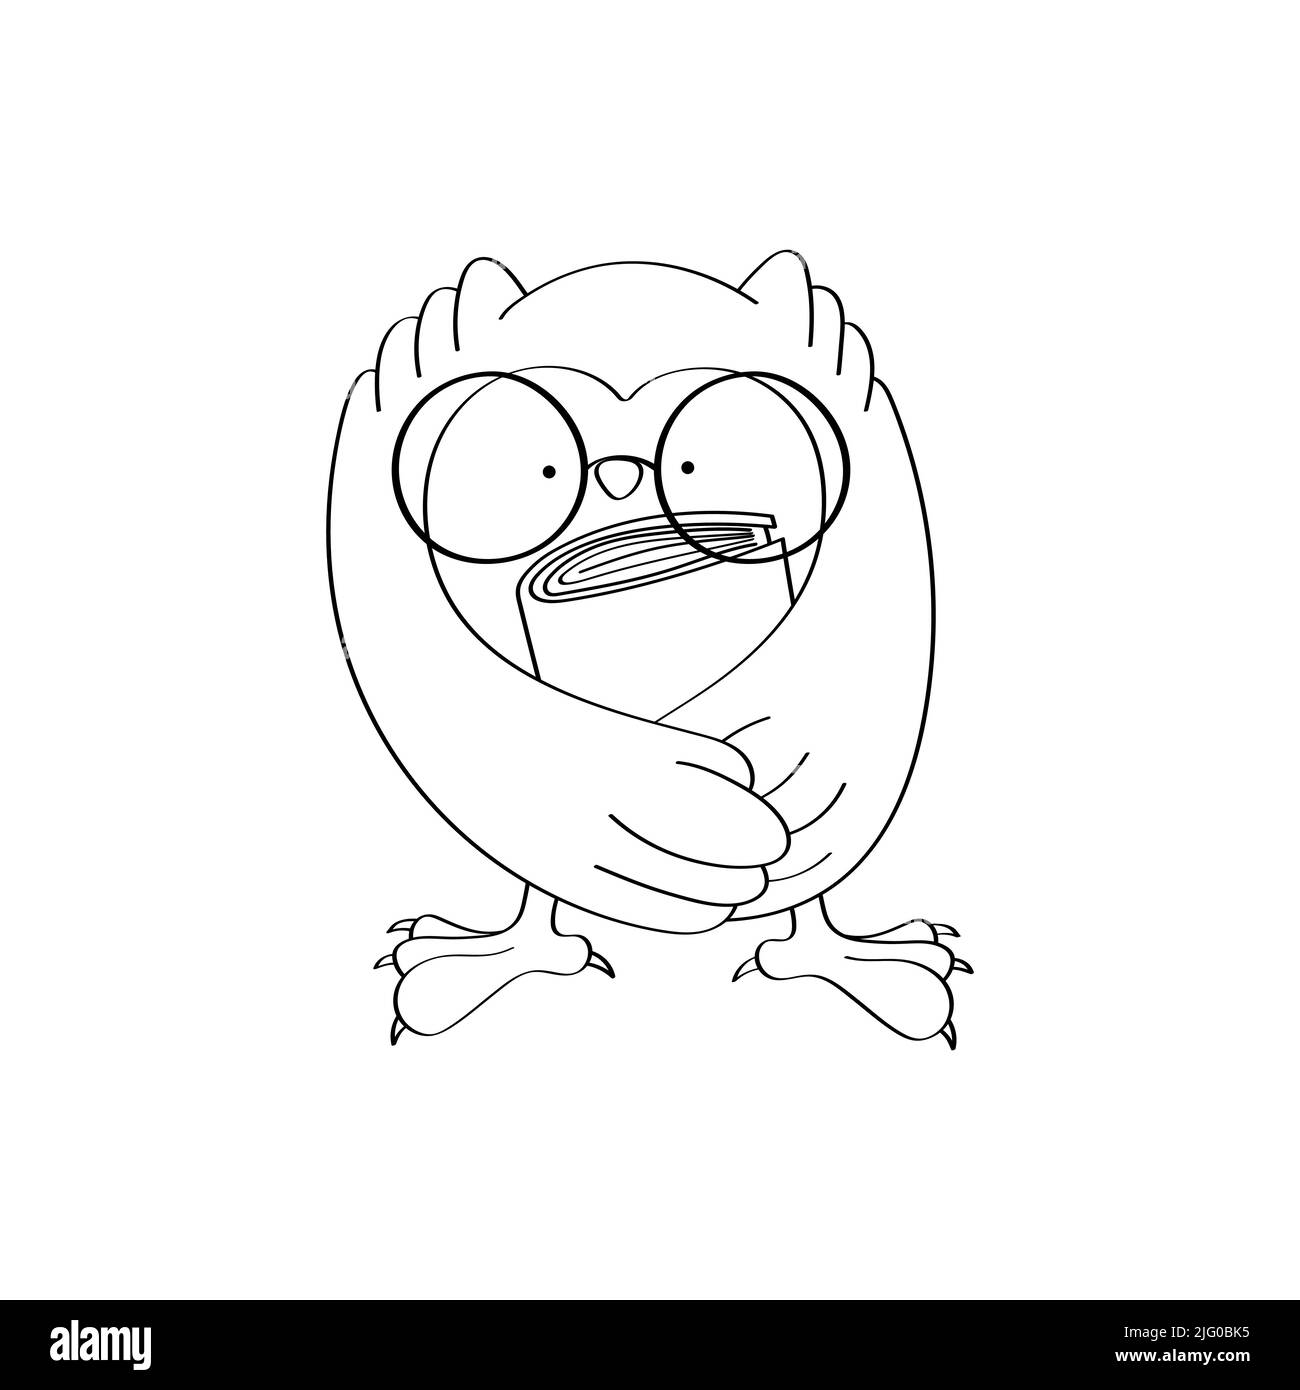 Owl Clipart Coloring Page in Cute Cartoon Style Beautiful Clip Art Owl in Glasses with a Book Black and White. Vector Illustration of an Bird for Stock Vector